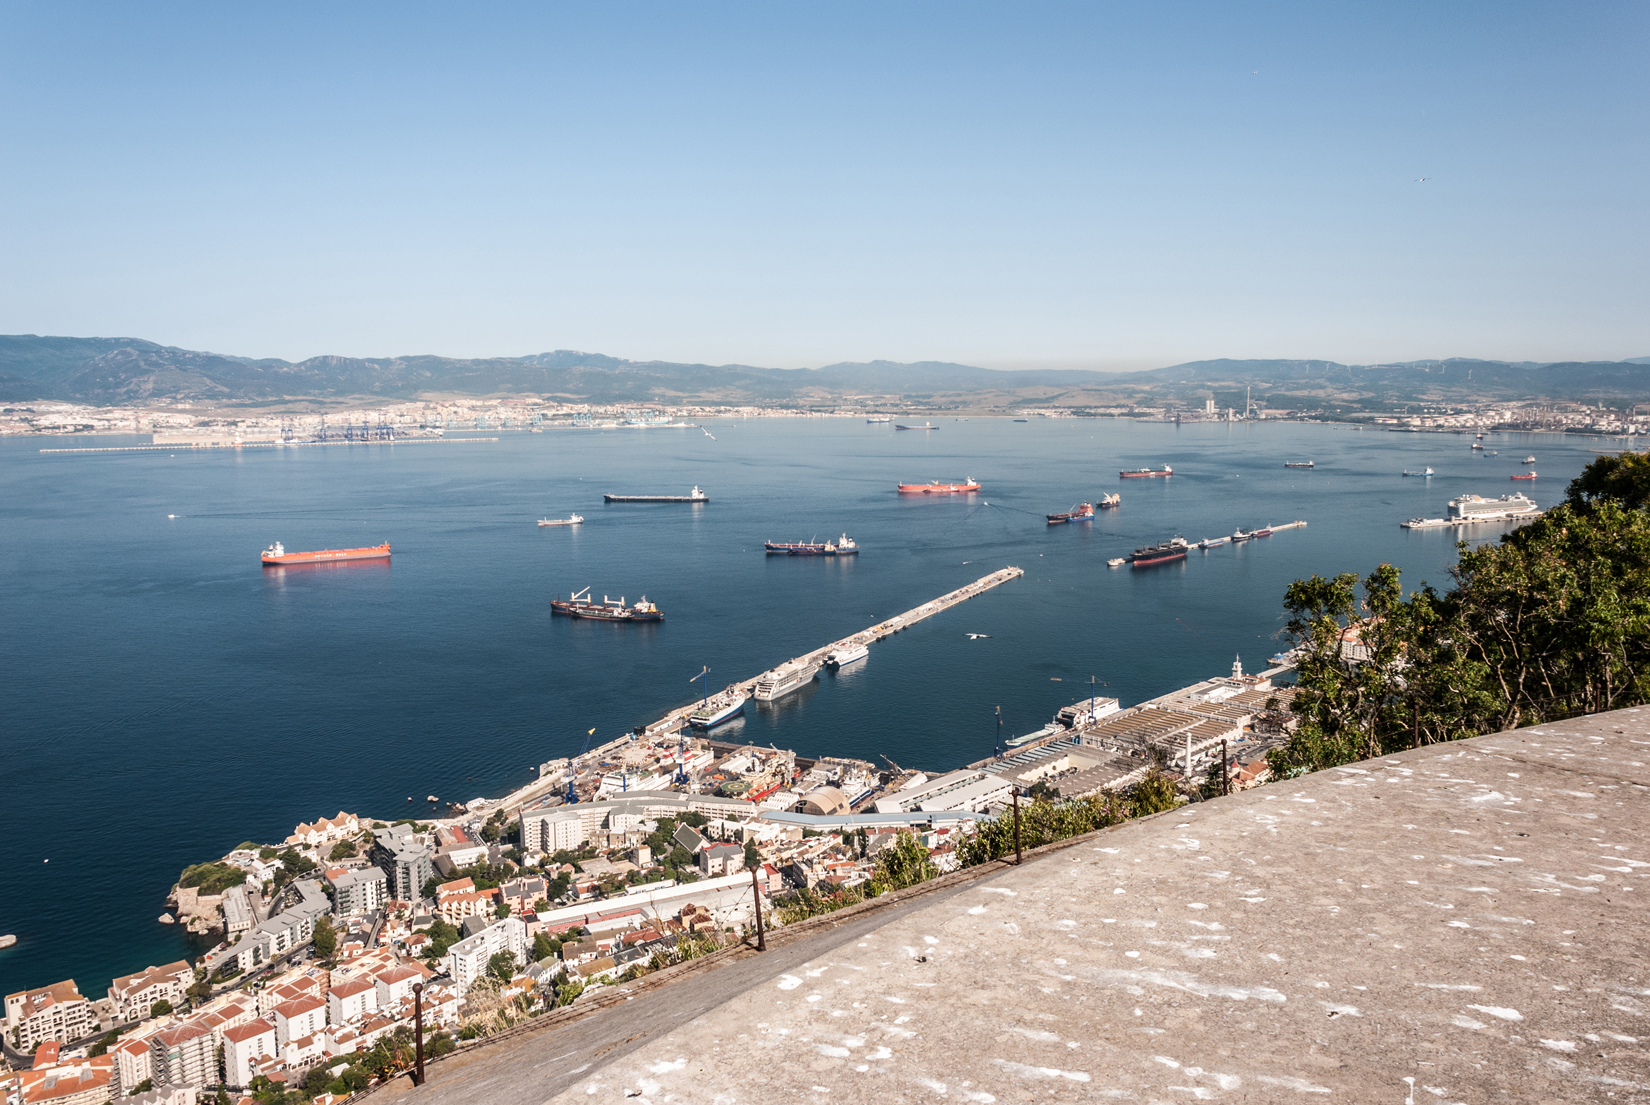 The Bay of Gibraltar and the harbour